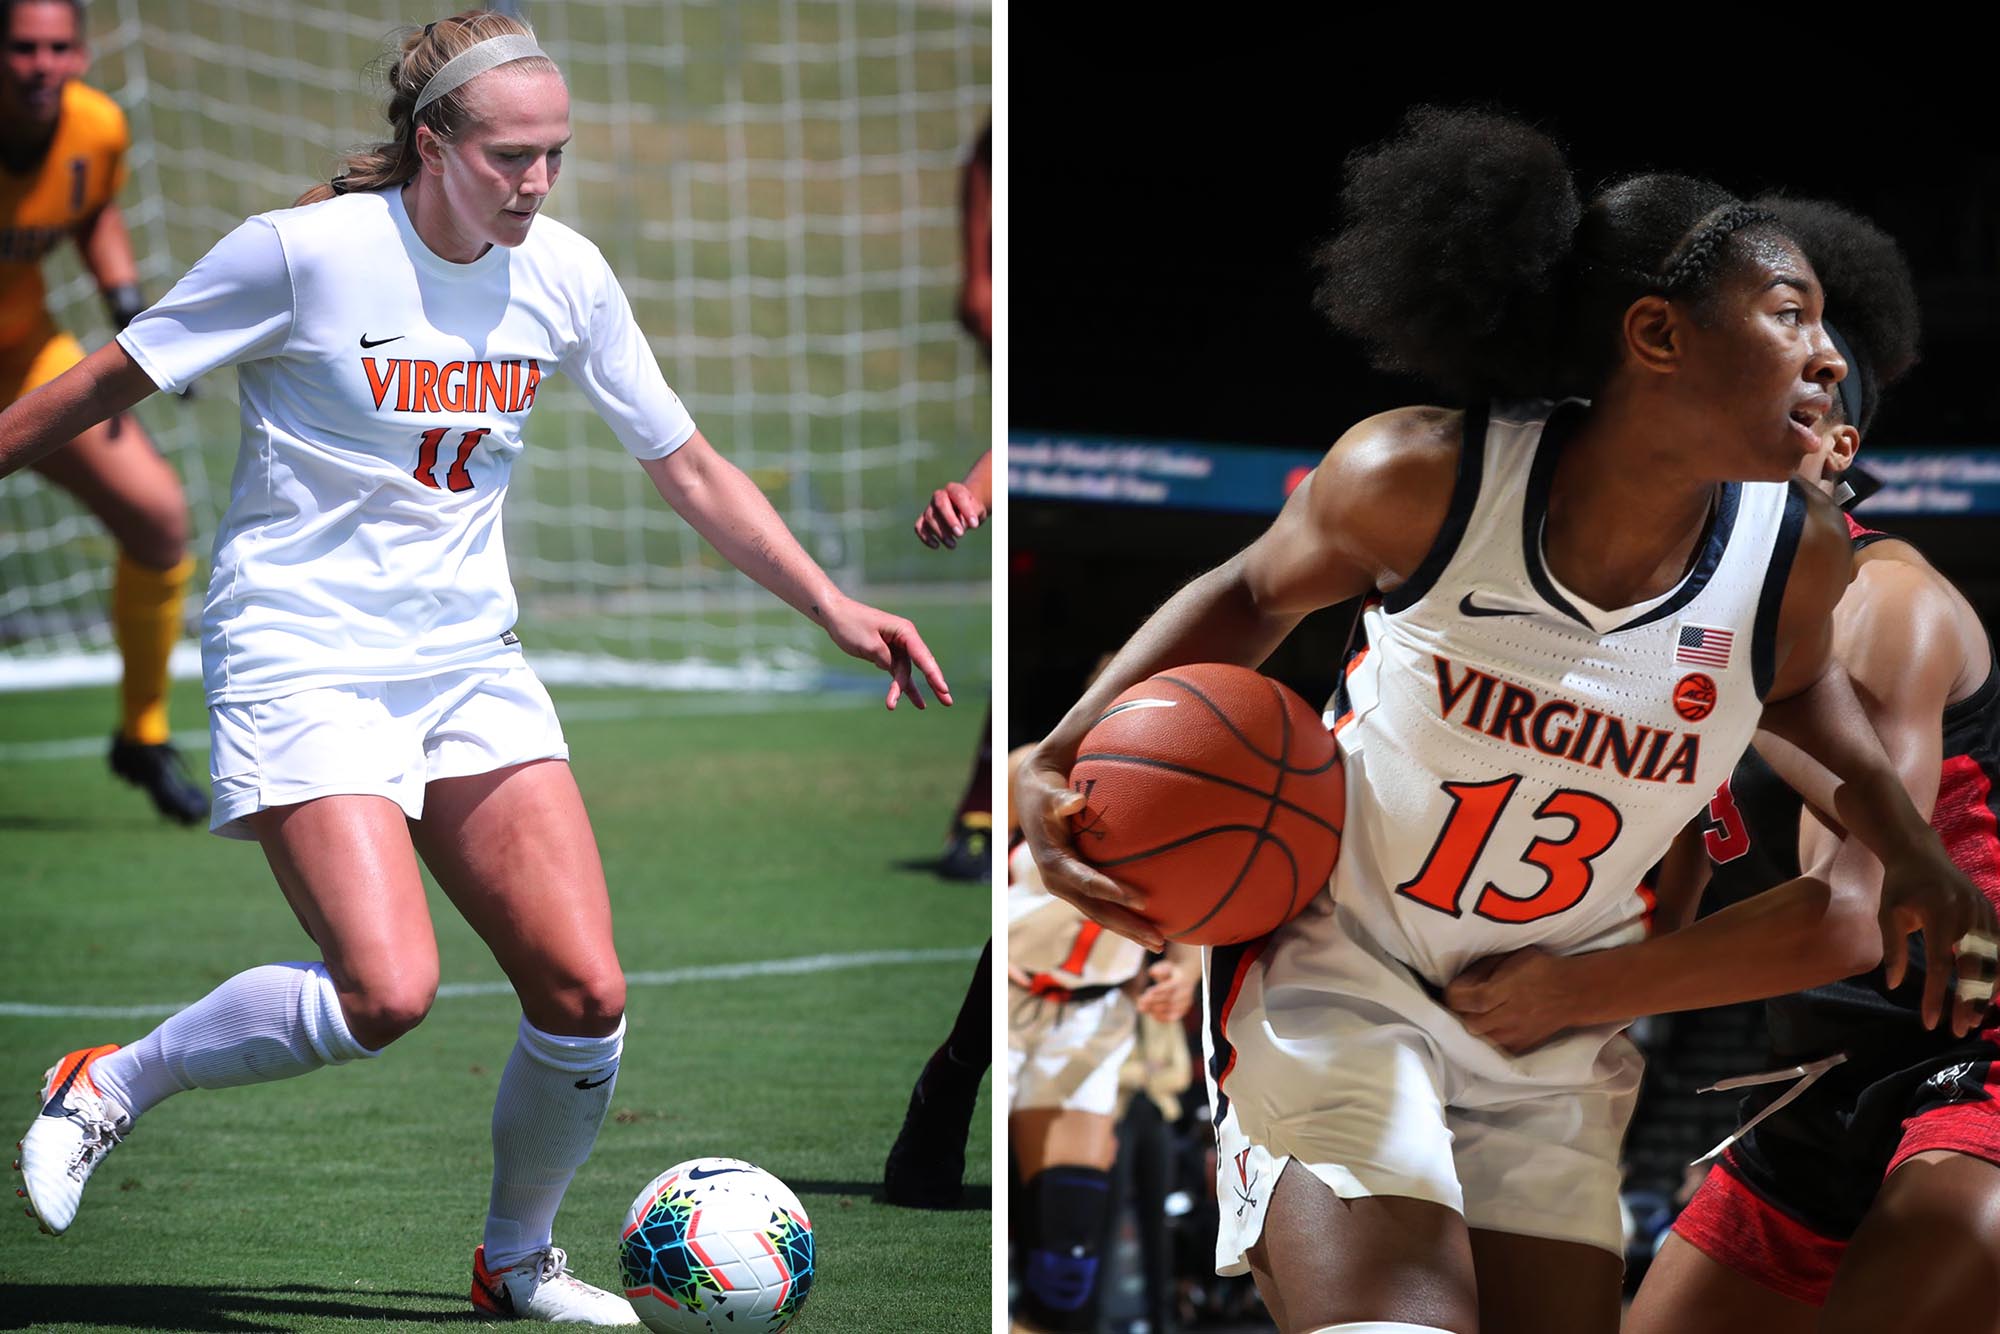 Zoe Morse, left, playing soccer during a UVA game and Jocelyn Willoughby, right, playing basketball during a game